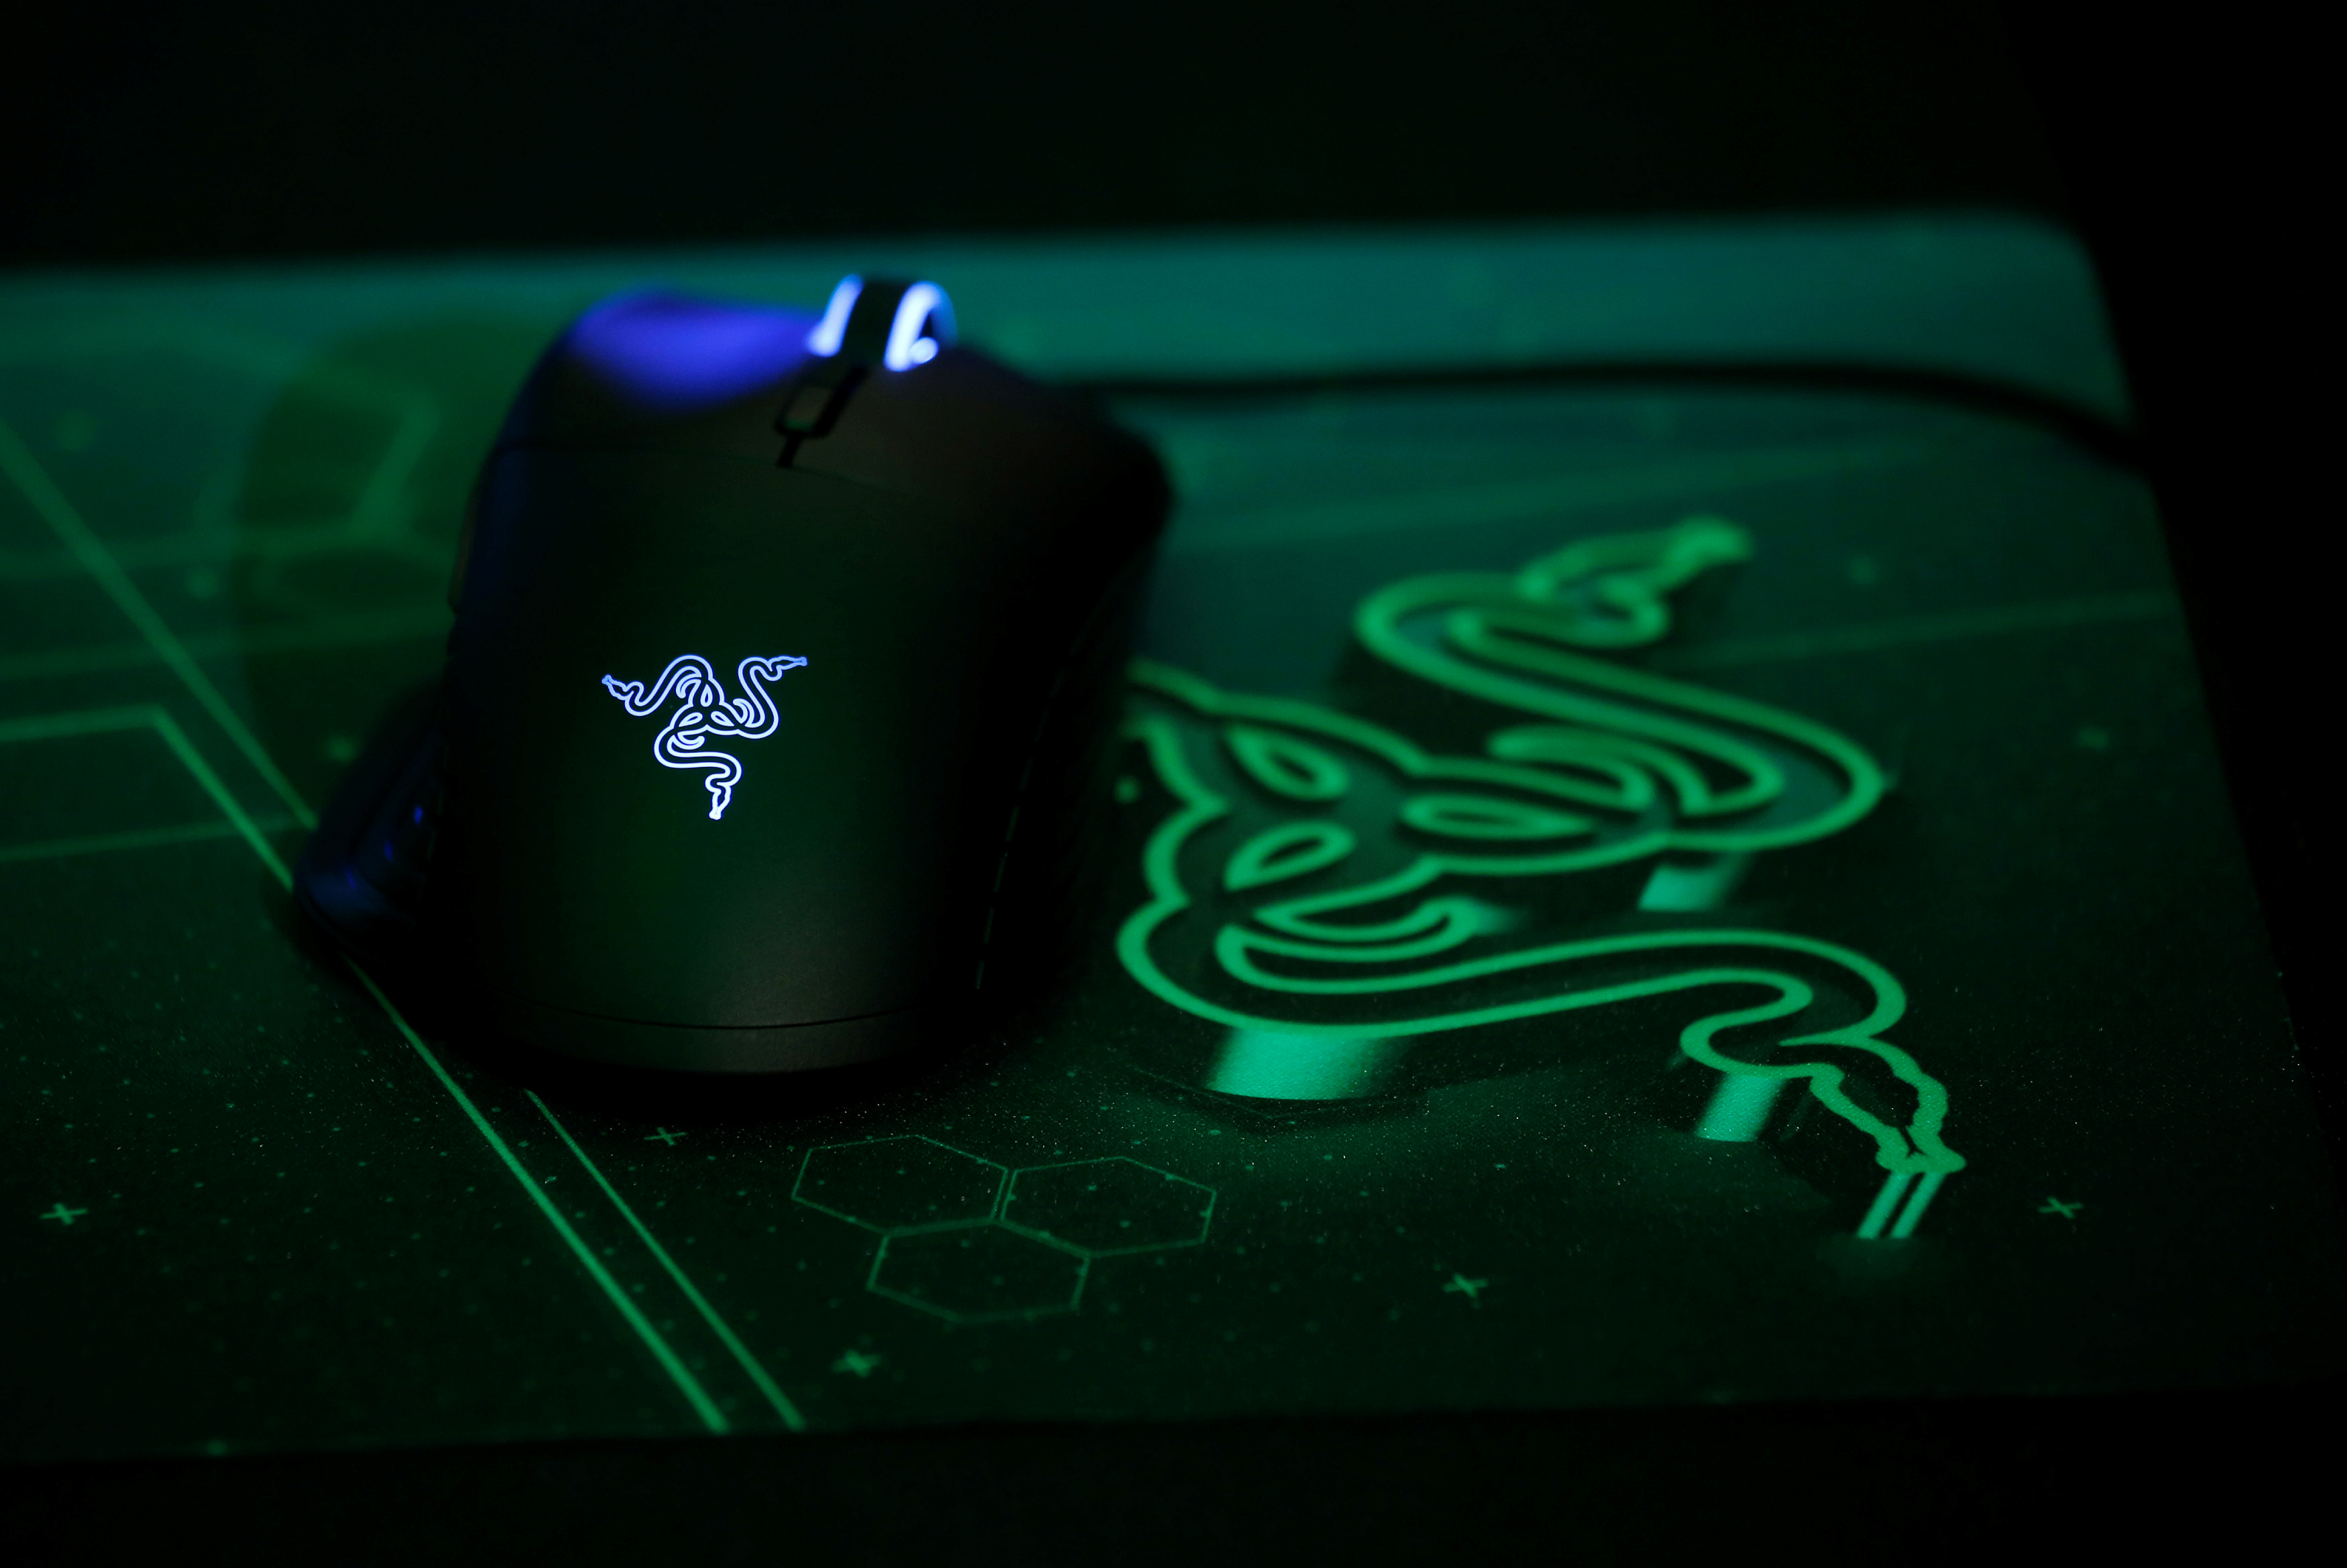 Razer products are displayed in Hong Kong